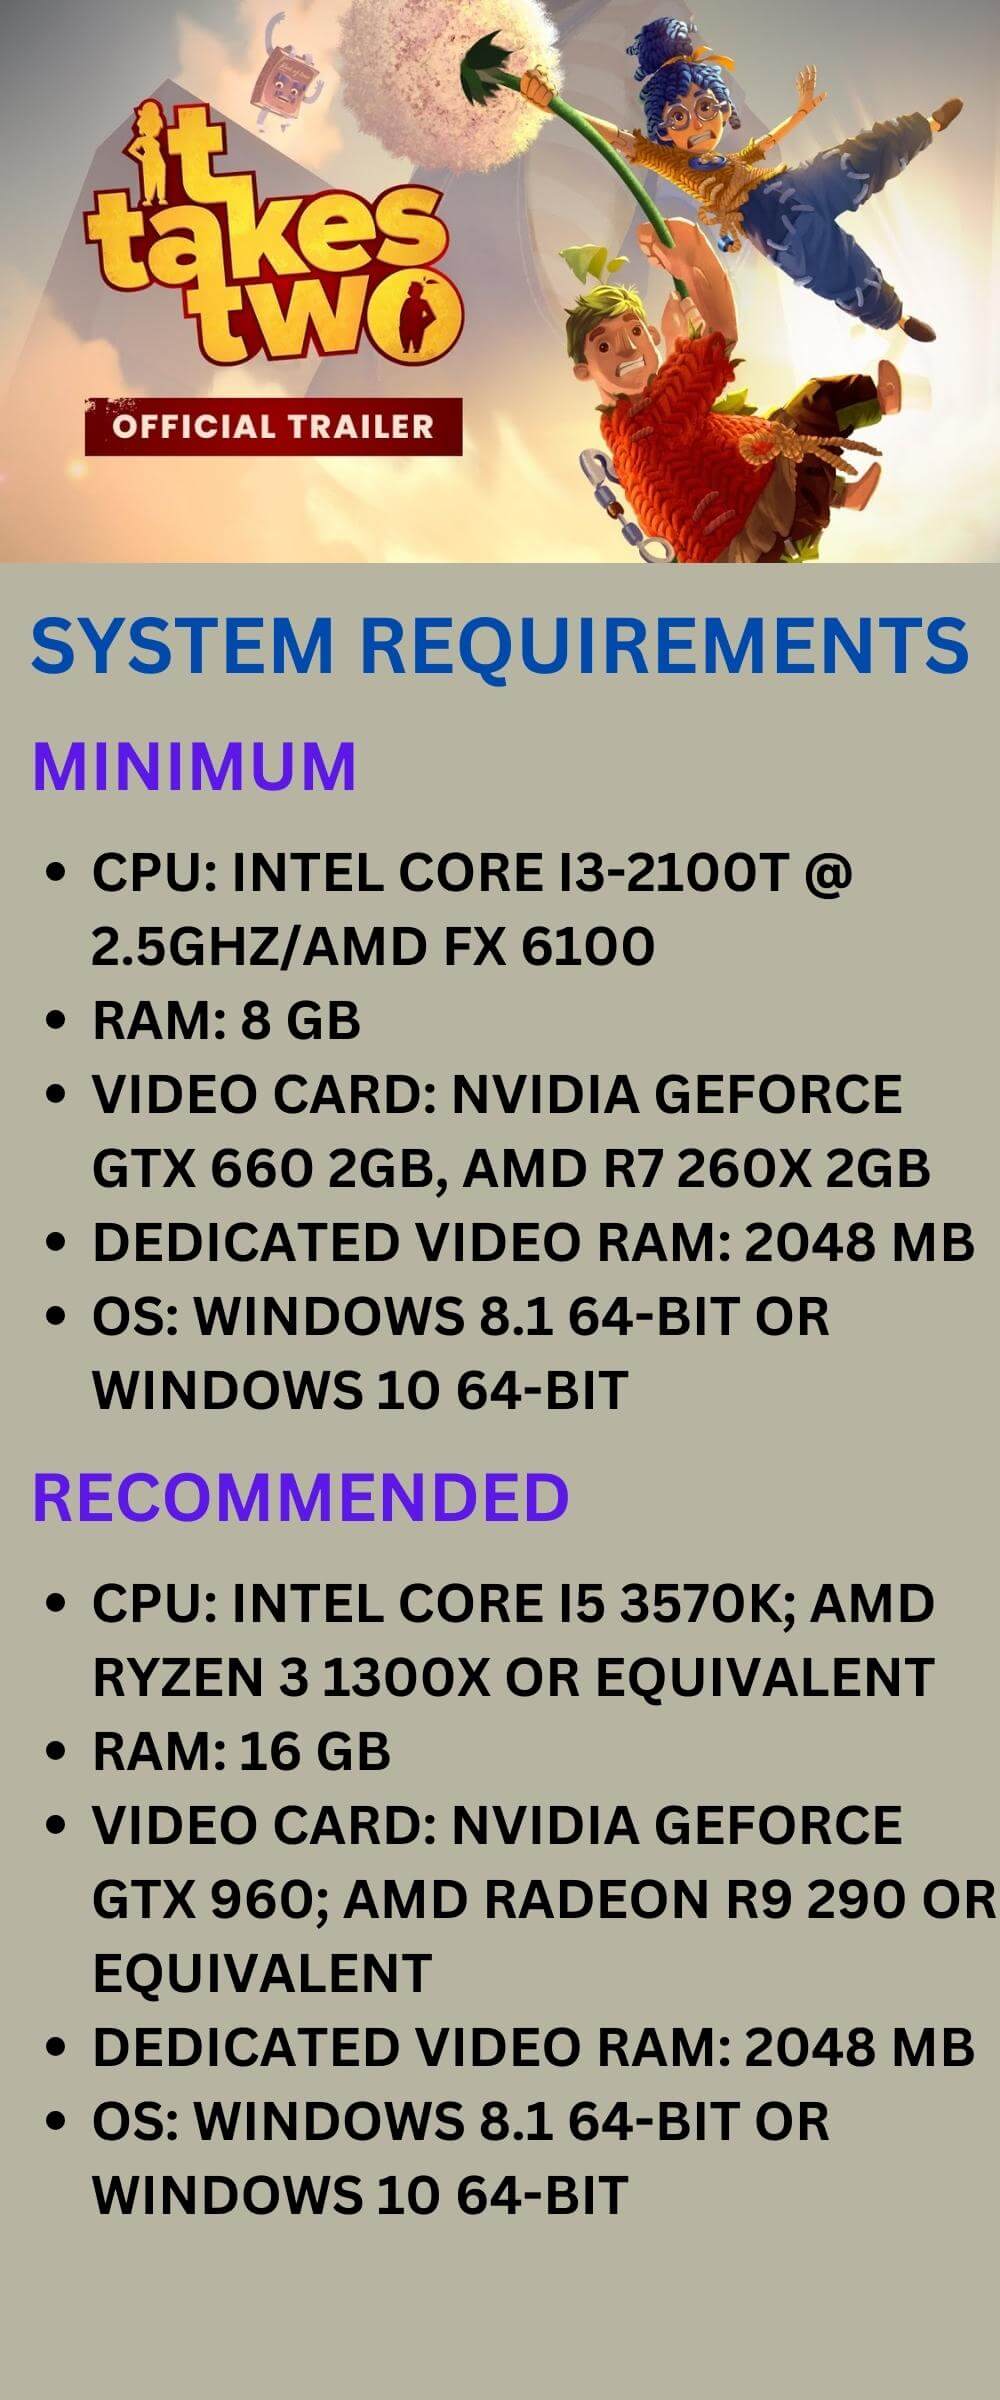 It Takes Two System Requirements